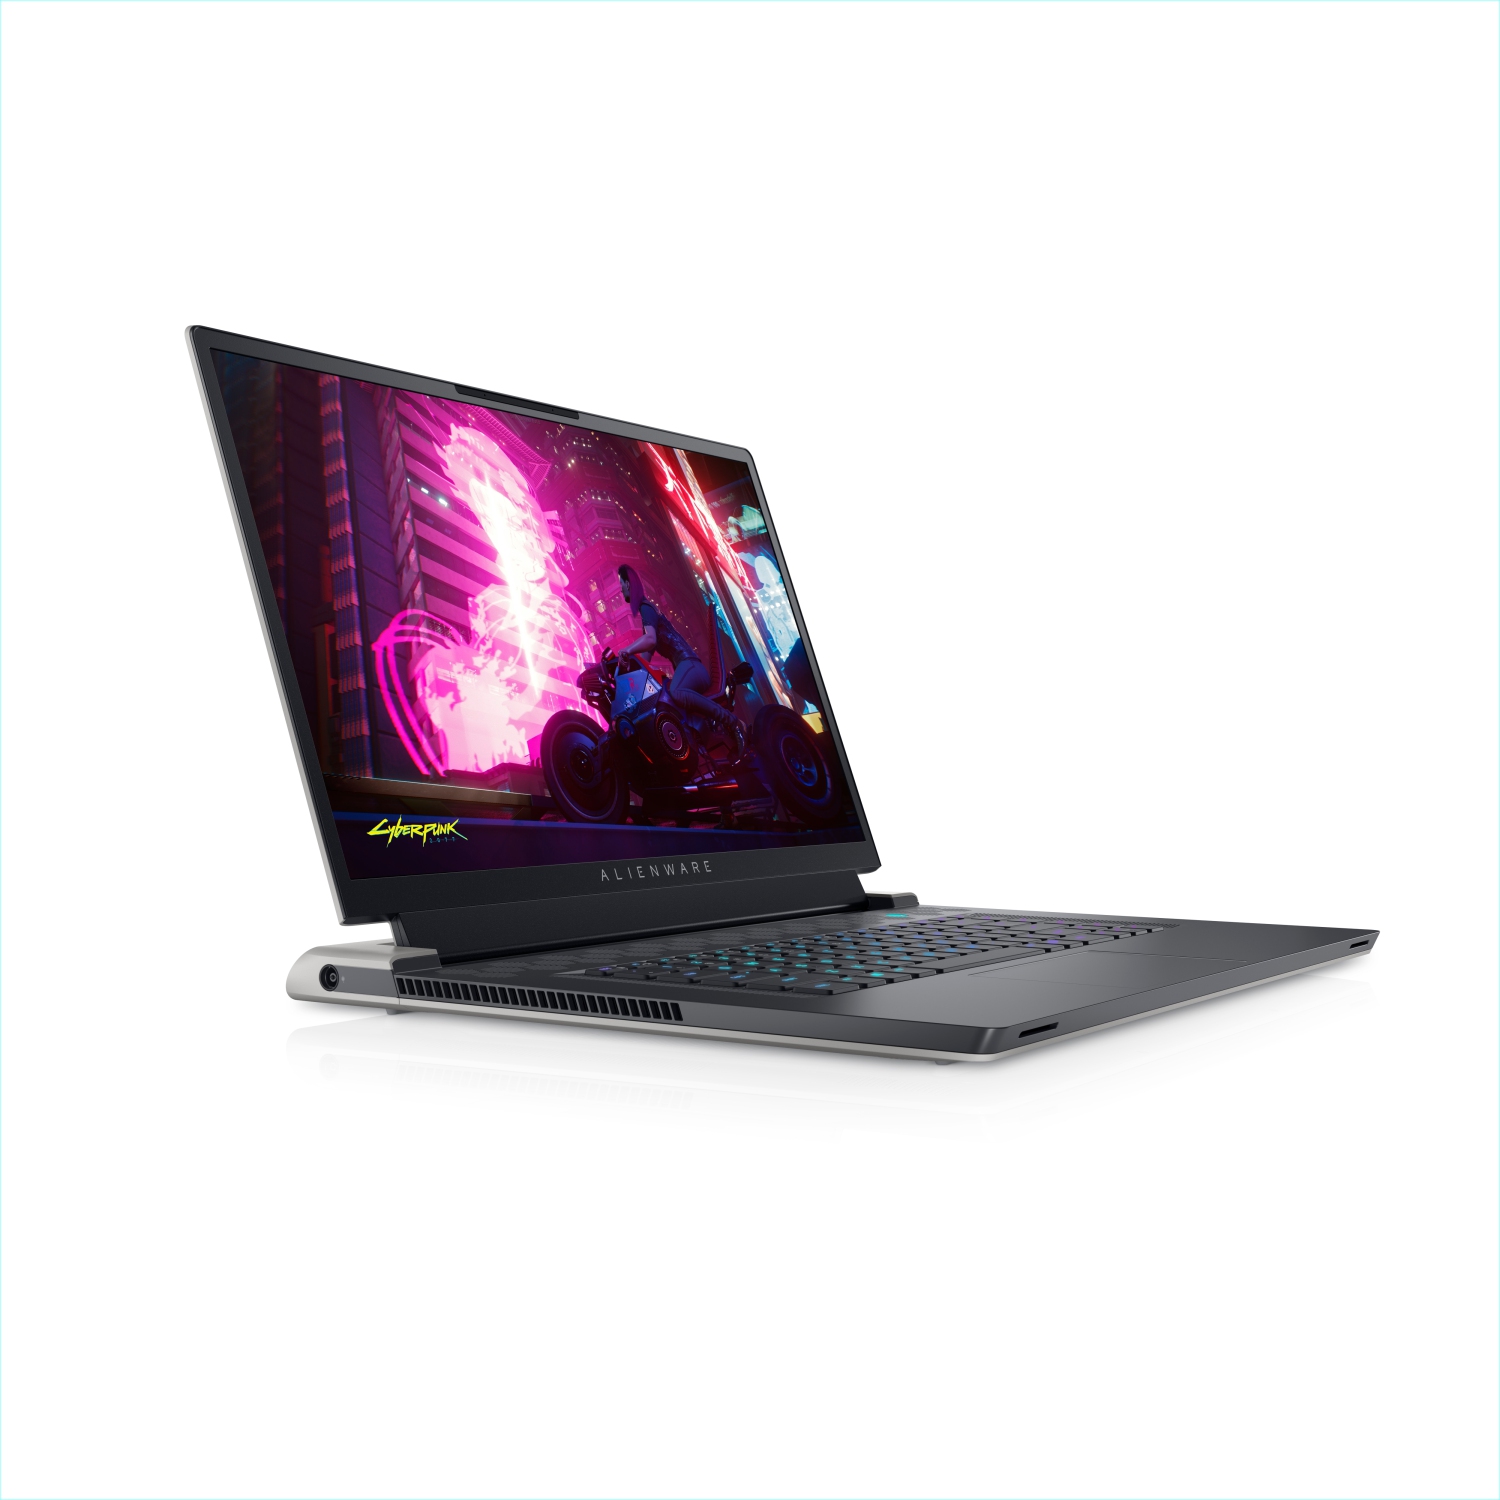 Refurbished (Excellent) - Dell Alienware X17 R1 Gaming Laptop (2021), 17.3" FHD, Core i7, 256GB SSD, 32GB RAM, RTX 3070, 8 Cores @ 4.6 GHz, 11th Gen CPU Certified